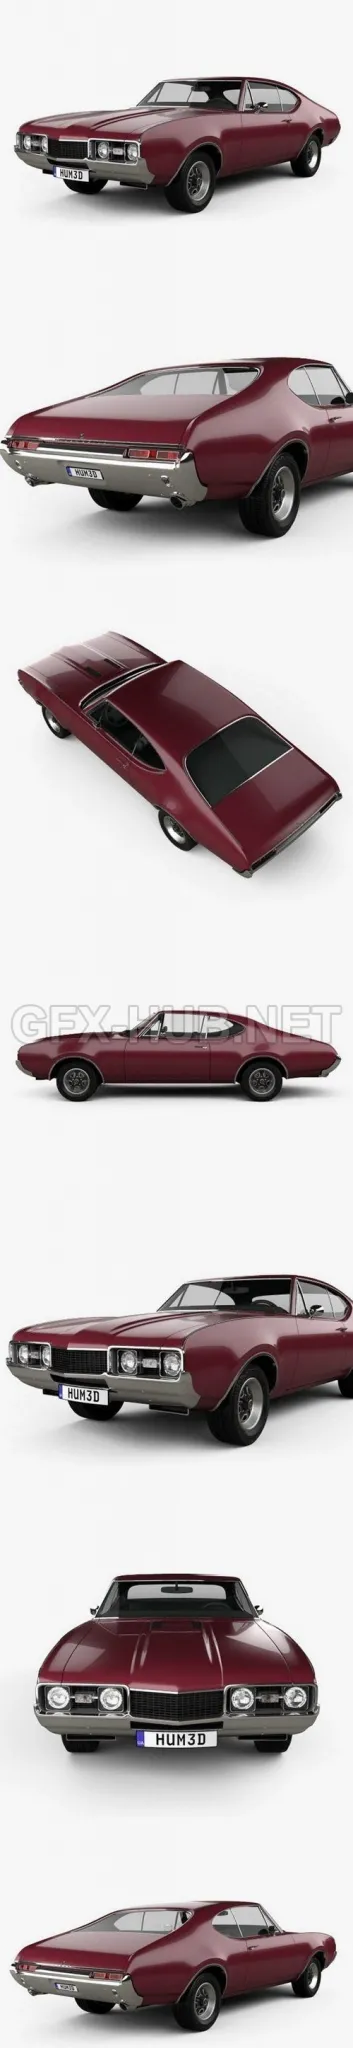 CAR – Oldsmobile Cutlass 442 (3817) Holiday coupe 1966  3D Model